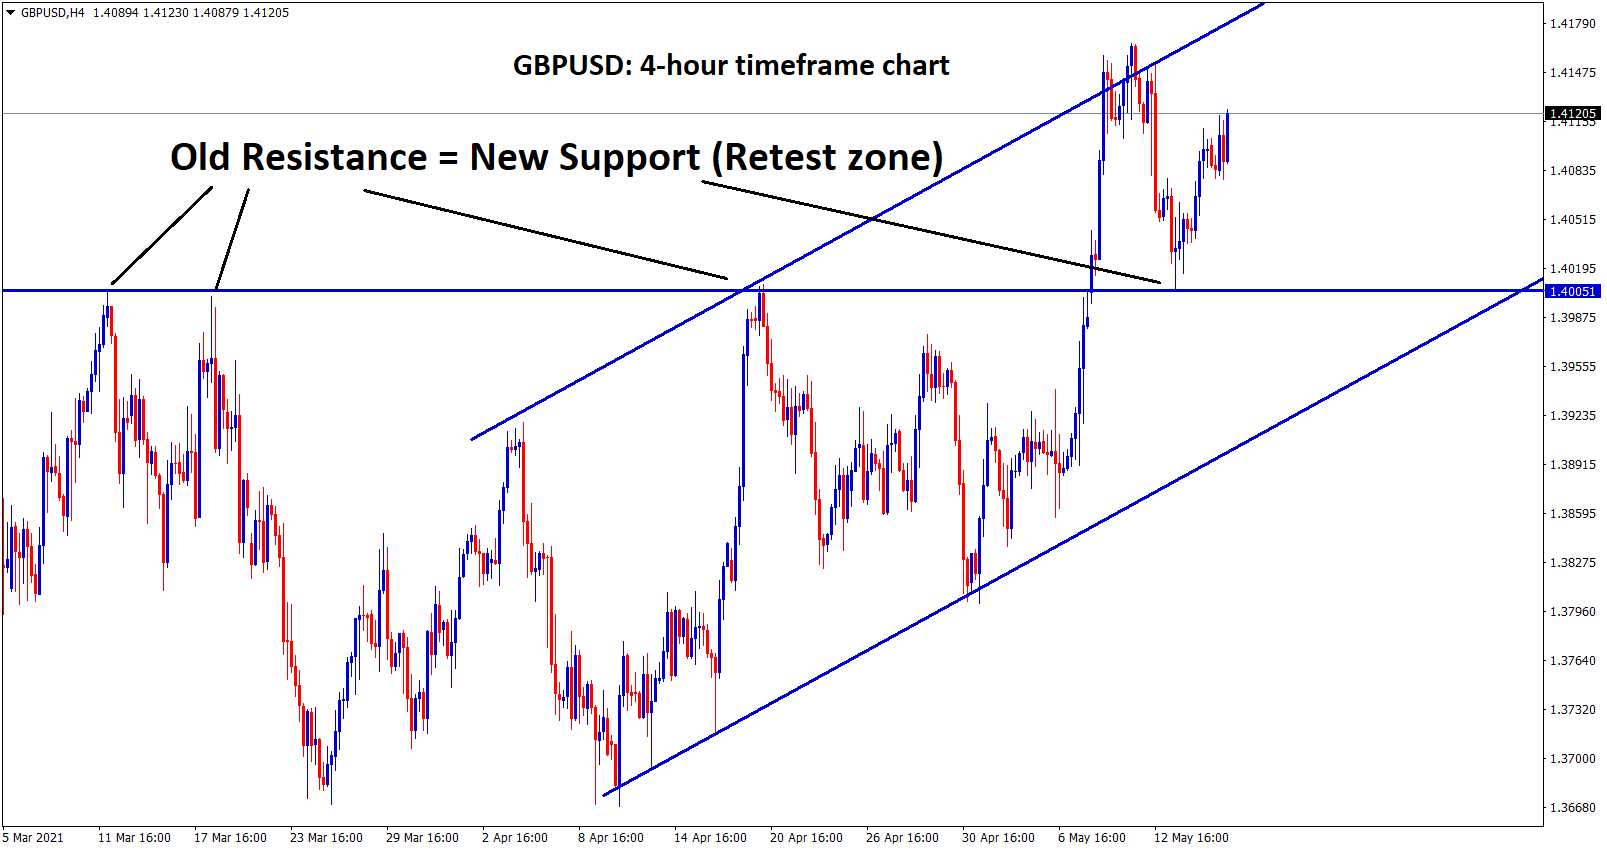 GBPUSD is moving up after retesting the support zone.